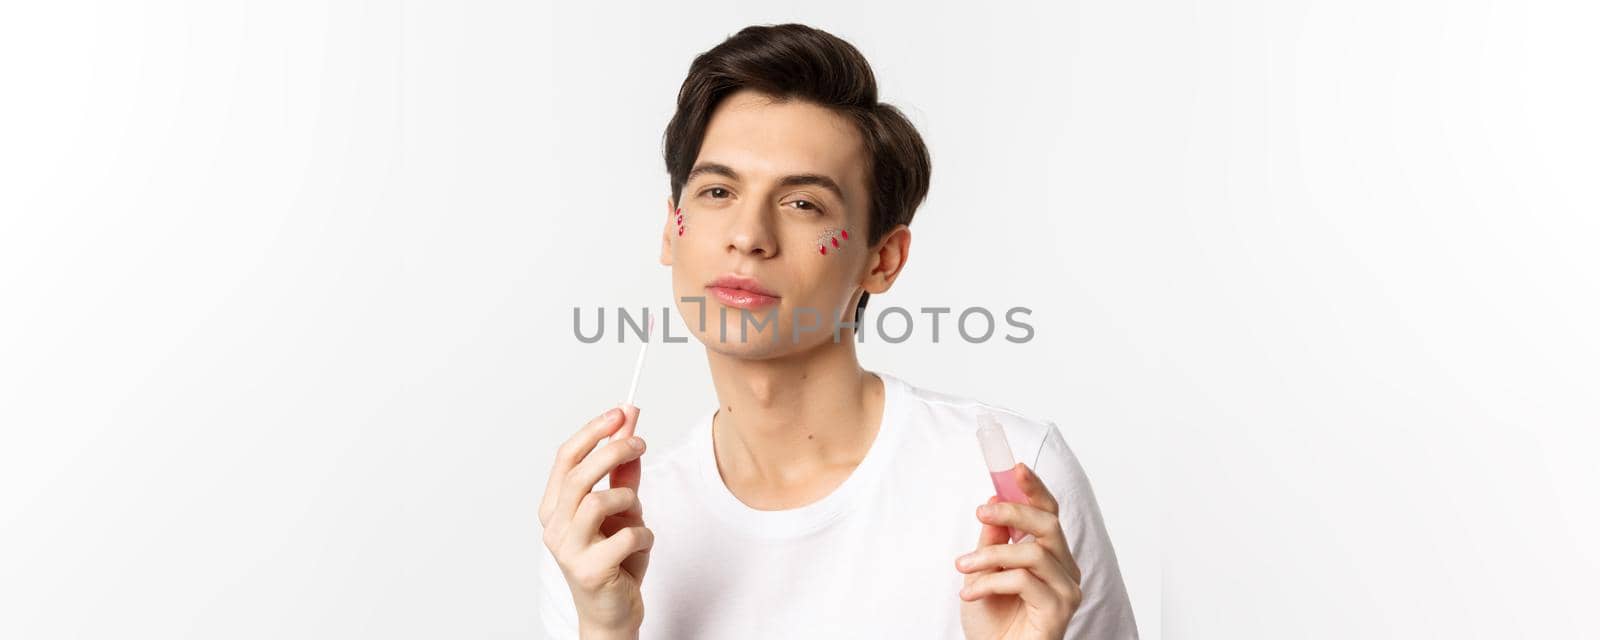 Close-up of beautiful queer person with glitter on face applying lips gloss and looking self-assured at camera, standing over white background.